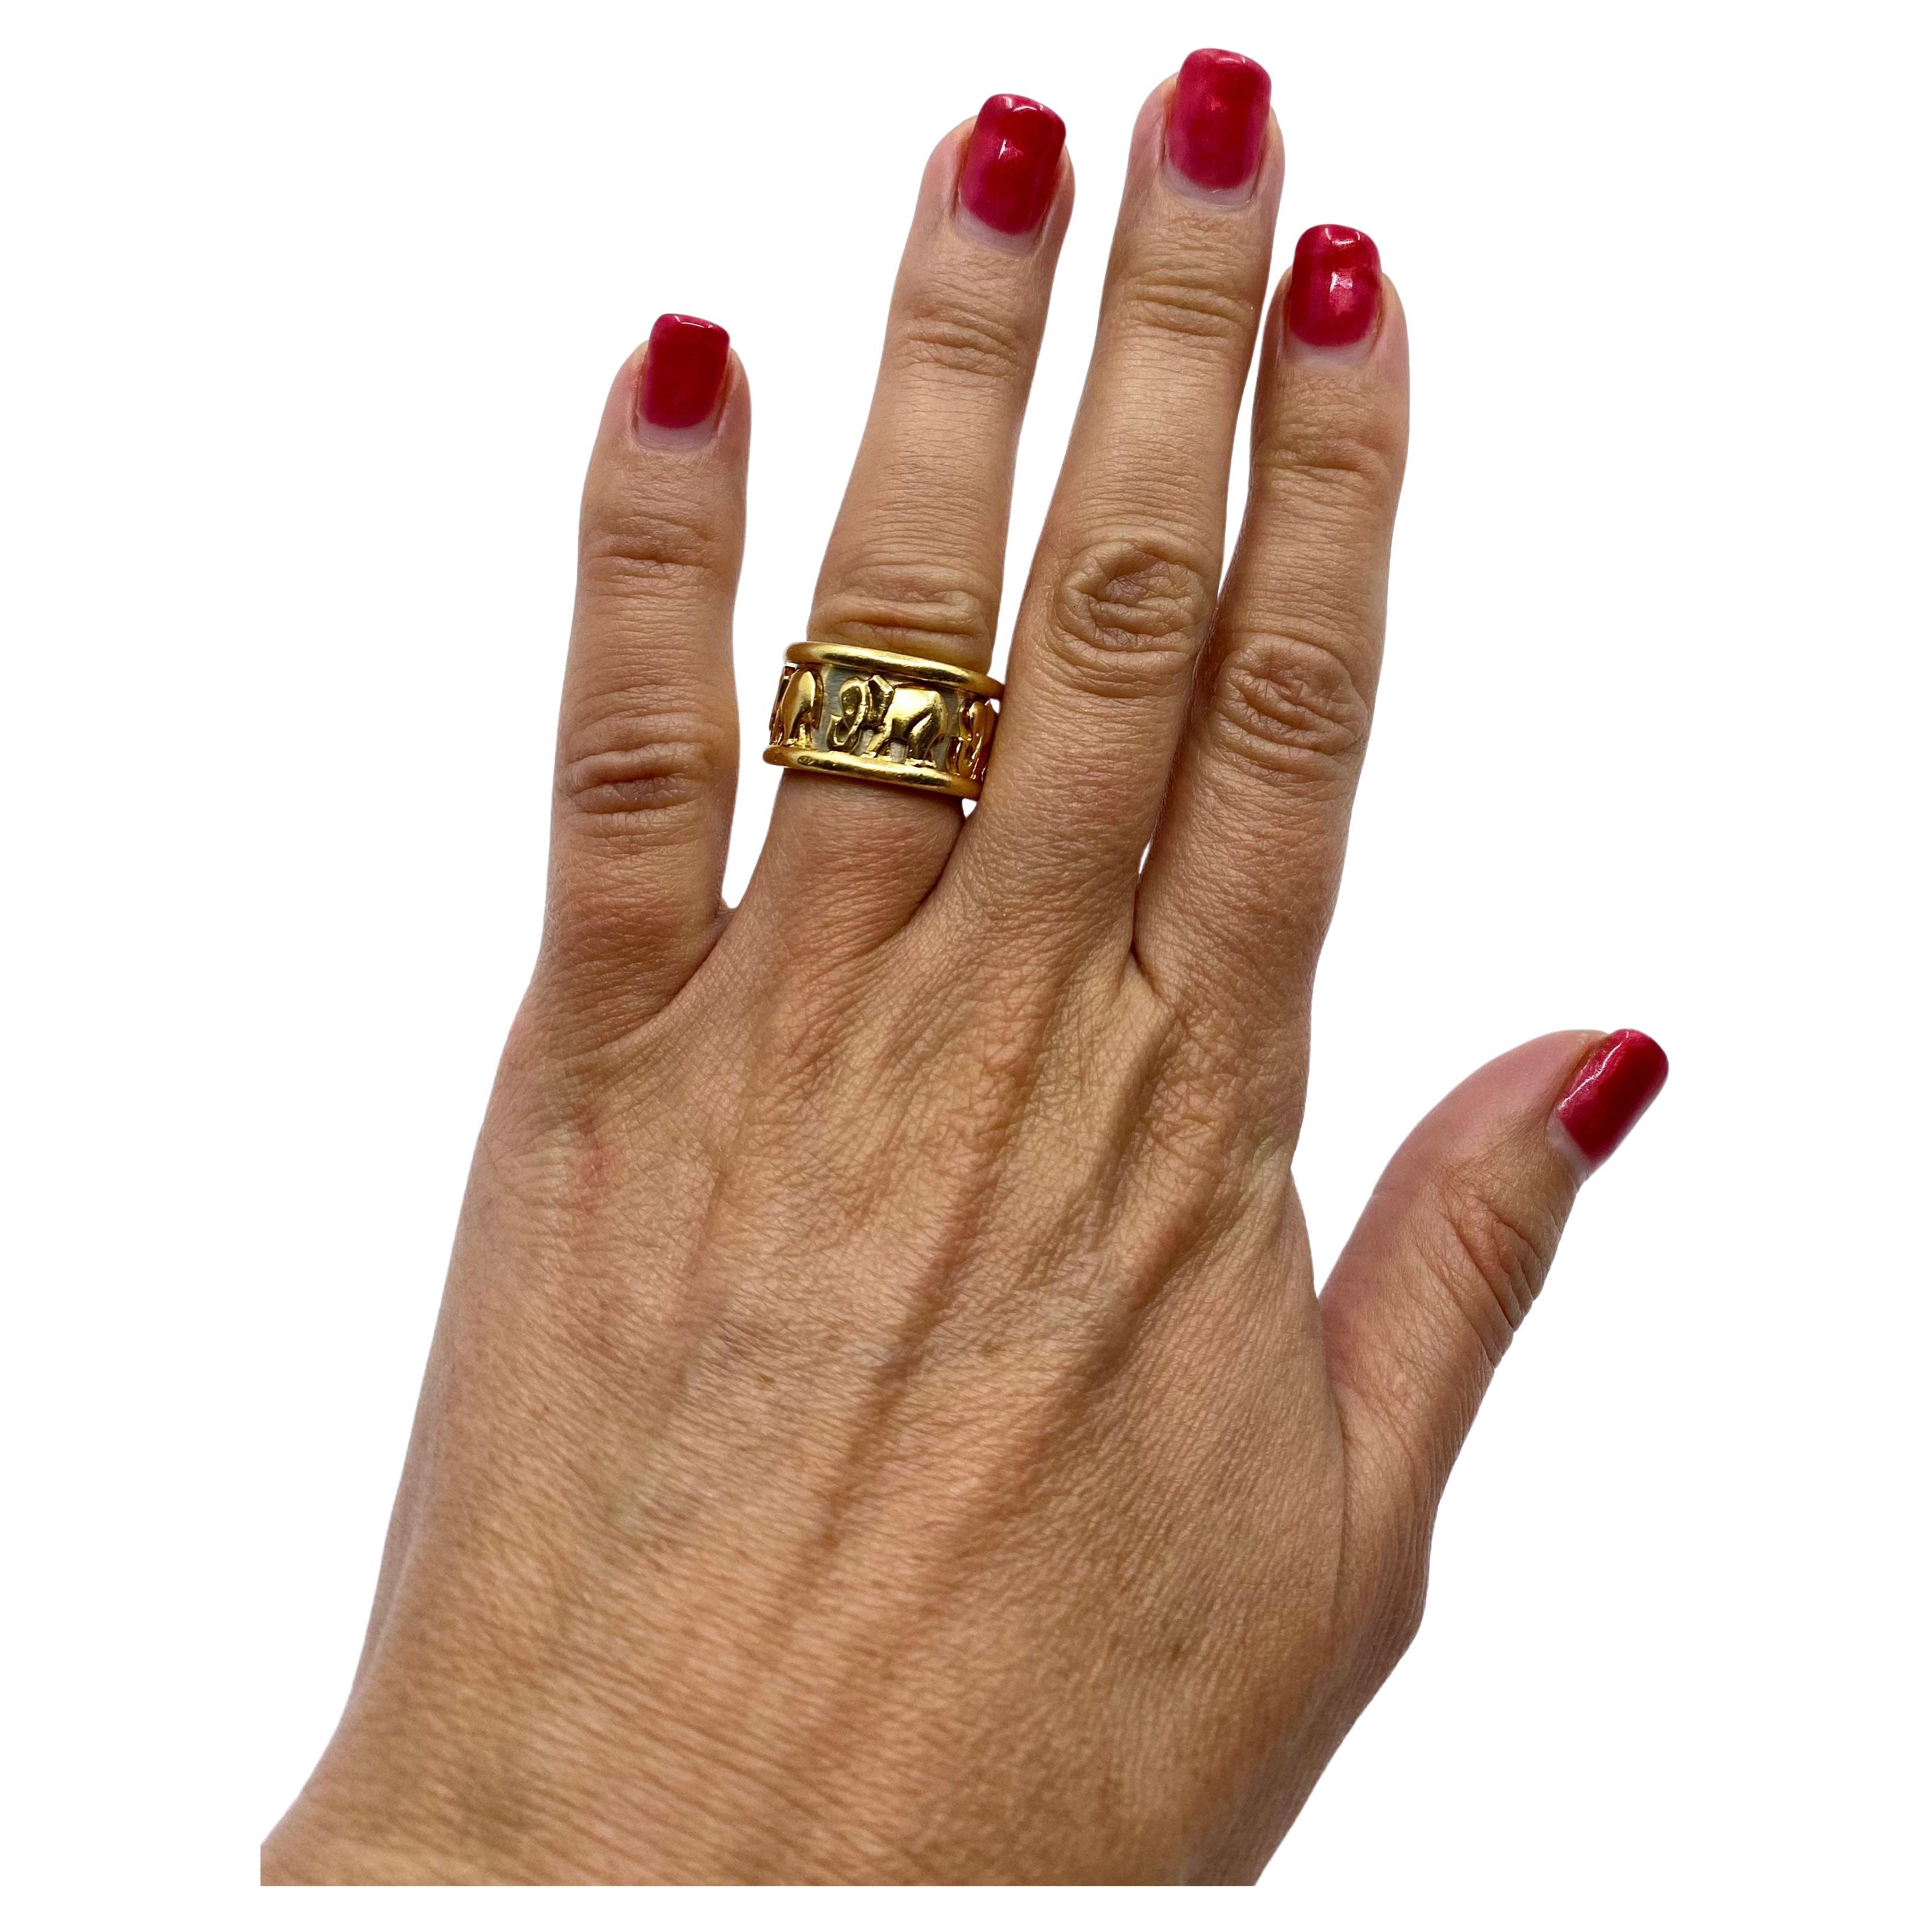 DESIGNER: Cartier
CIRCA: 1990s
MATERIALS:18k Yellow and White Gold
WEIGHT: 16 grams
RING SIZE: 5.5
MEASUREMENTS: 7/16